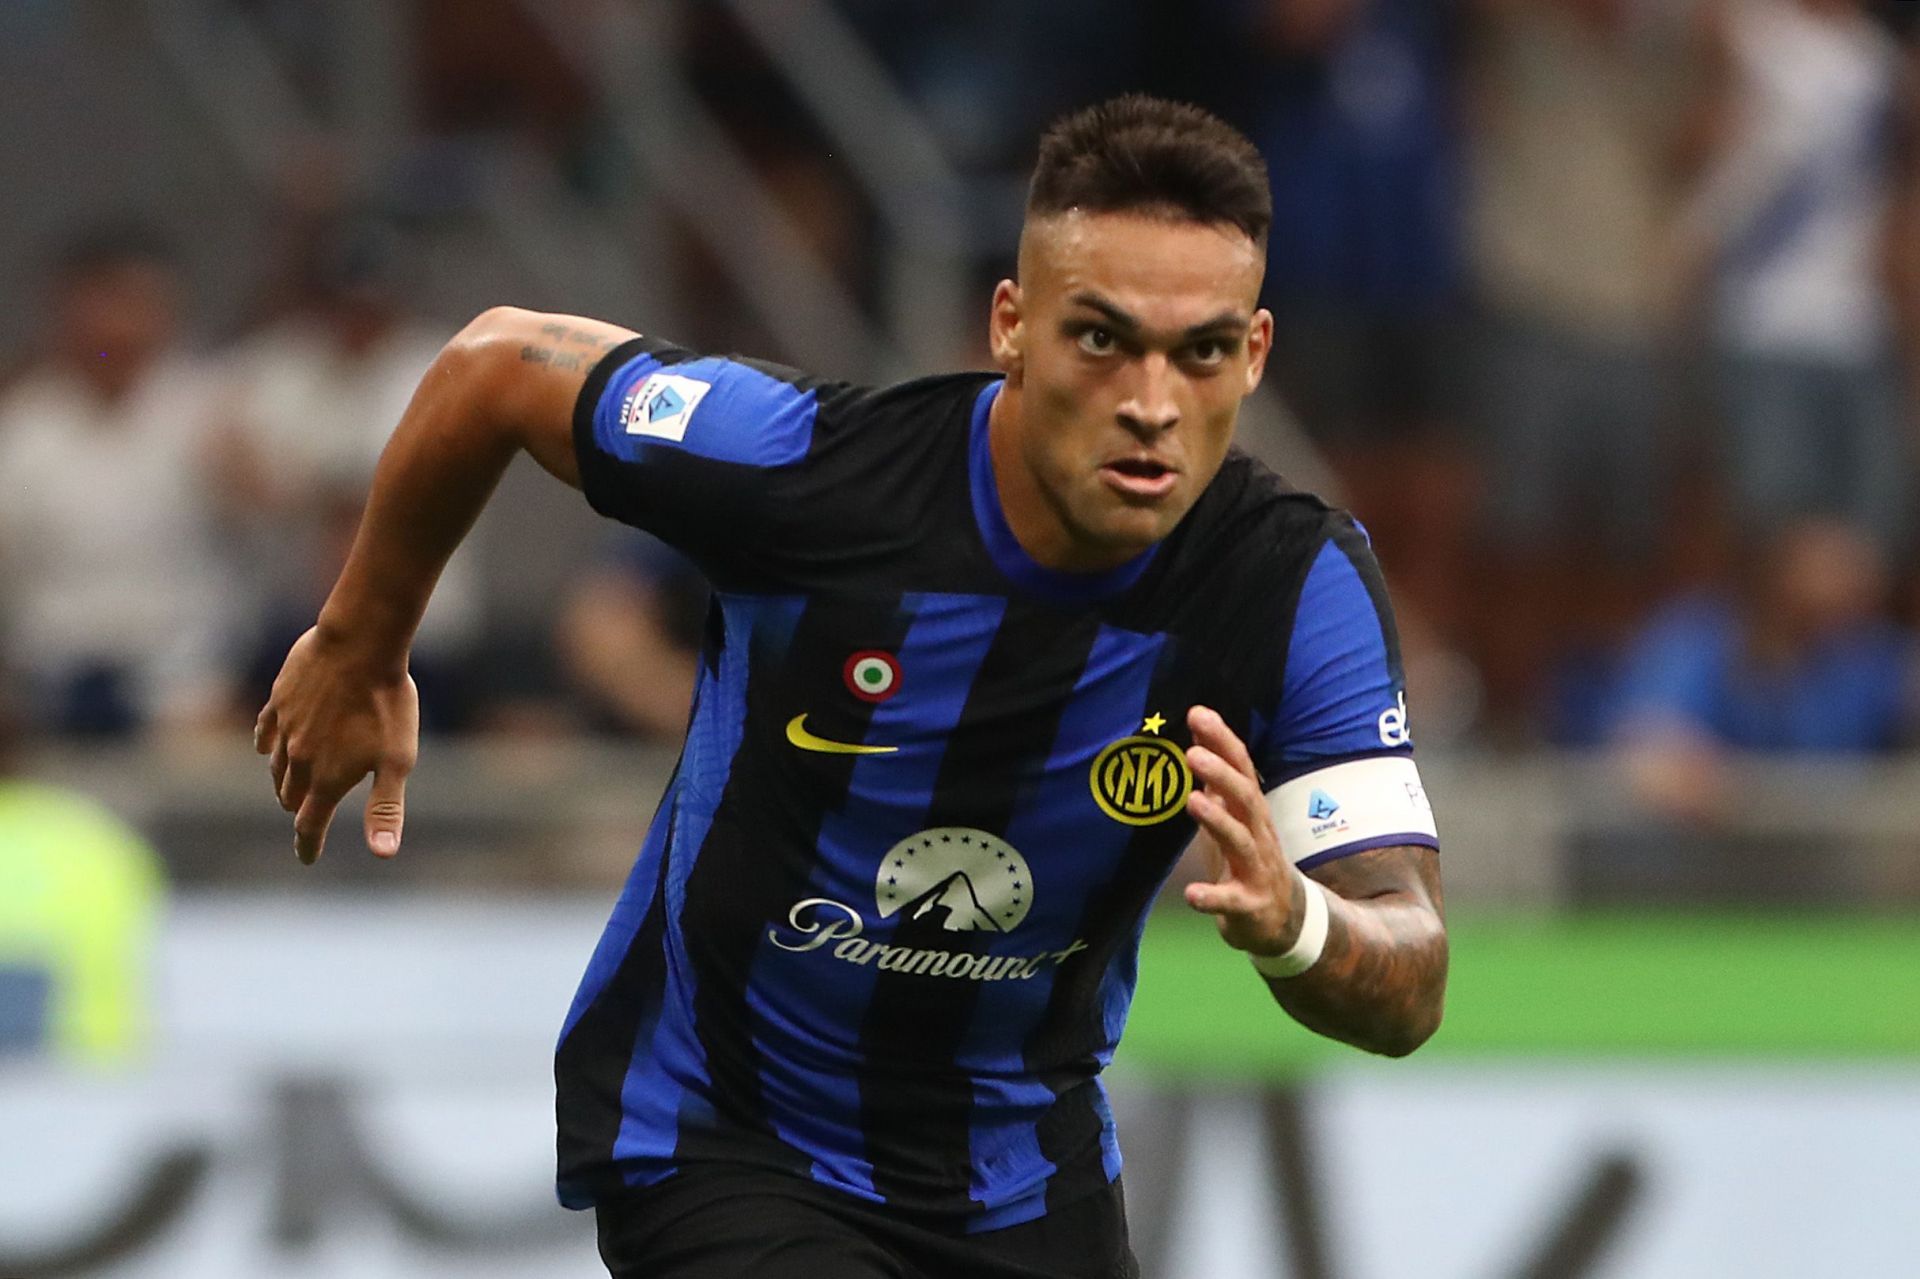 Lautaro Martinez is currently one of the most in-form players in Europe